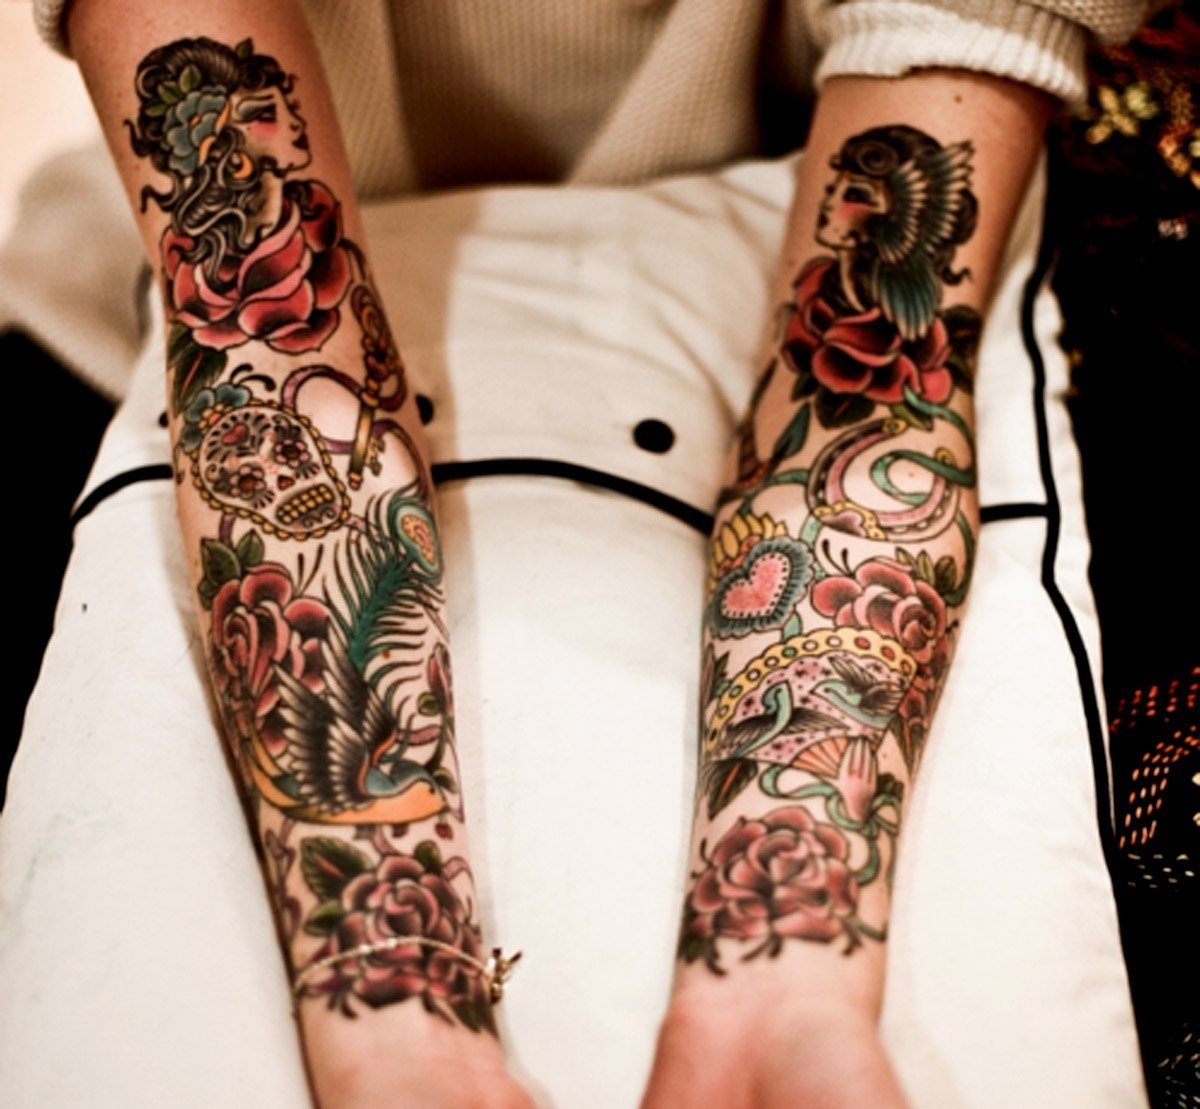 Nice Old School Tattoos On Both Forearms